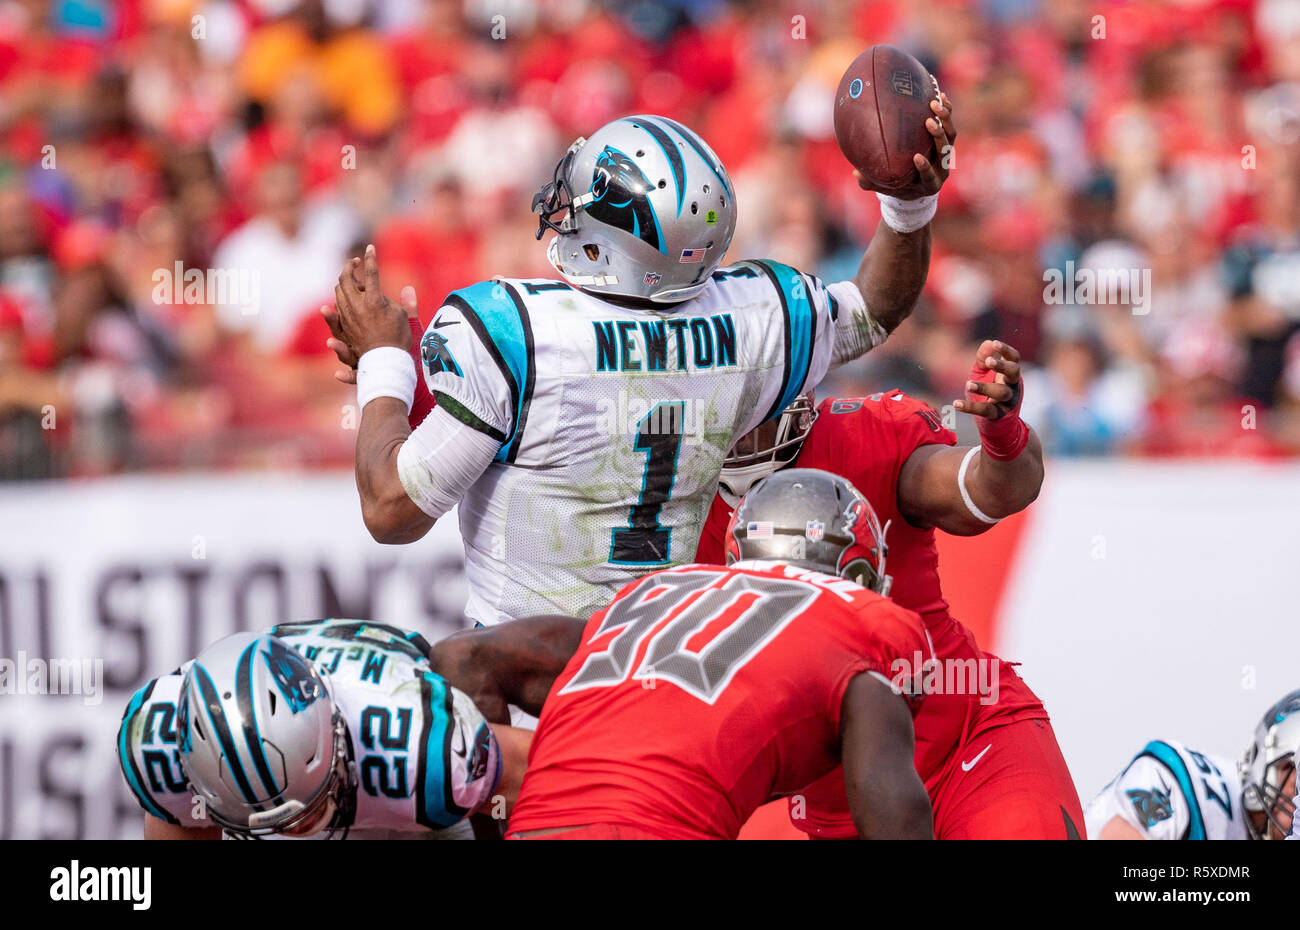 Tampa, Florida, USA. 02nd Dec, 2018. Carolina Panthers quarterback Cam Newton (1) gets rushed and throws an interception to Tampa Bay Buccaneers defensive back Andrew Adams (26) in the 4th quarter during the game between the Carolina Panthers and the Tampa Bay Buccaneers at Raymond James Stadium in Tampa, Florida. Del Mecum/CSM/Alamy Live News Stock Photo